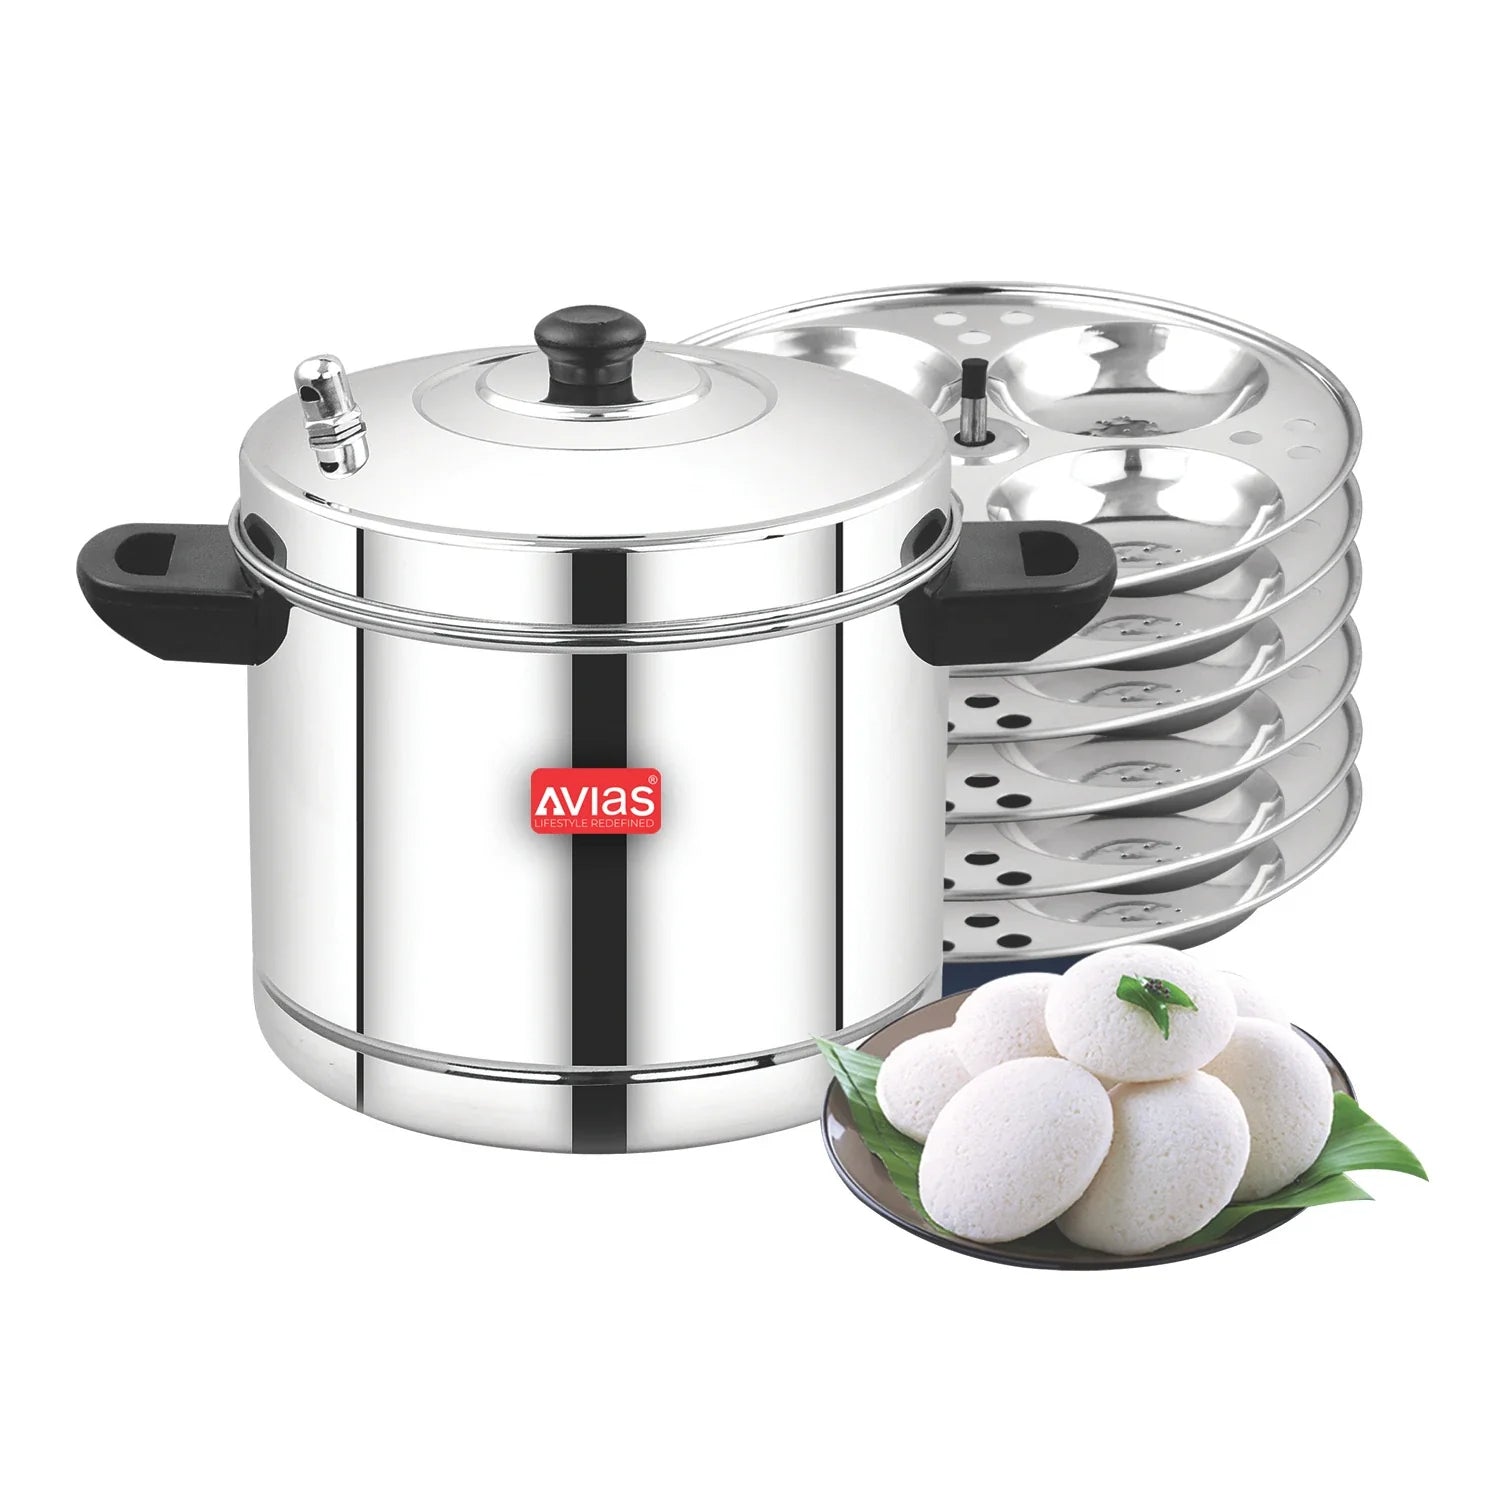 AVIAS stainless steel Idly cooker/ Idly maker/ Idly pot with Bakelite handles